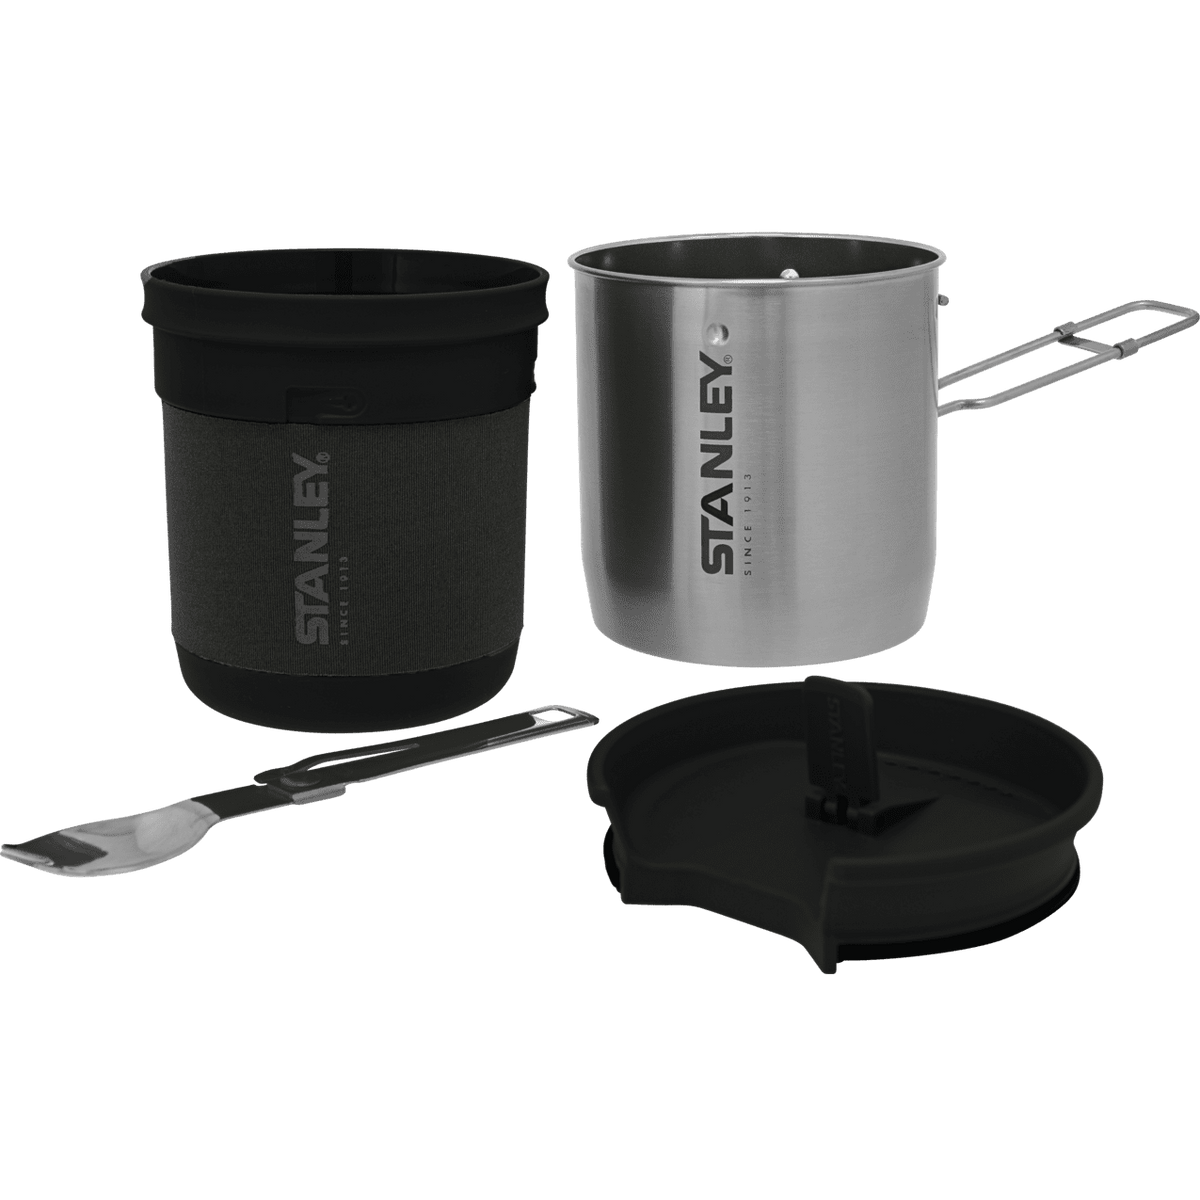 Camping Gear Stanley Adventure Prep + Cook Set Camping Cookware